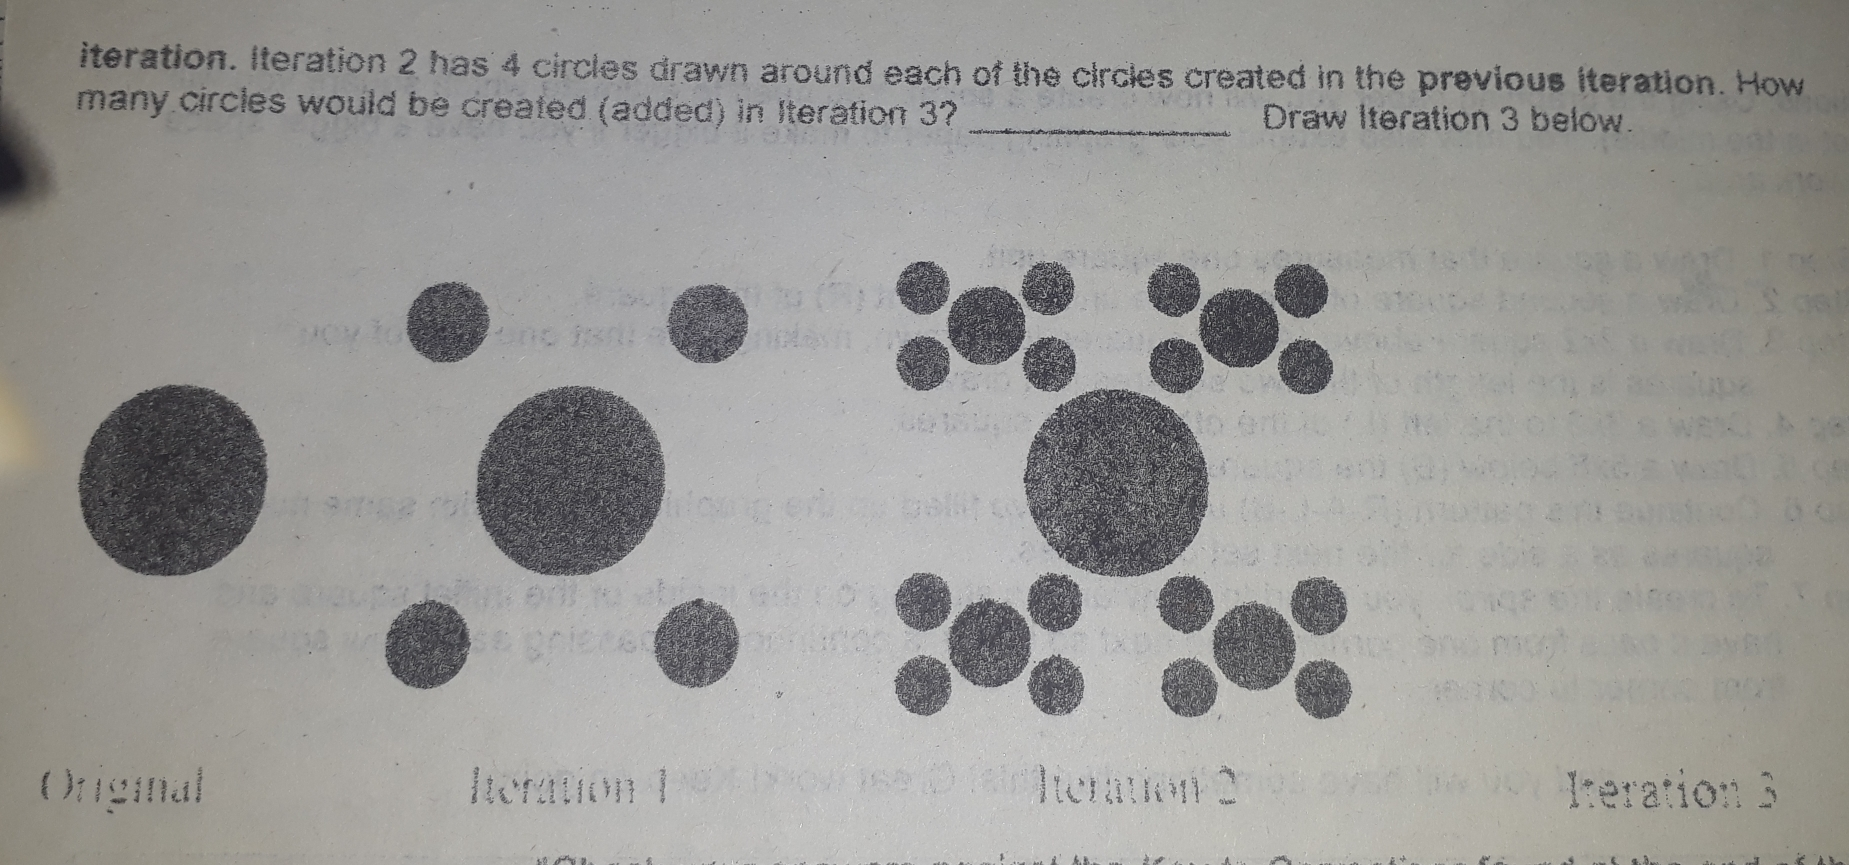 iteration. Iteration 2 has 4 circles drawn around each of the circles created in the previous iteration. How many circles would be created added in Iteration 3? Draw Iteration 3 below. Origmal Ieration 3